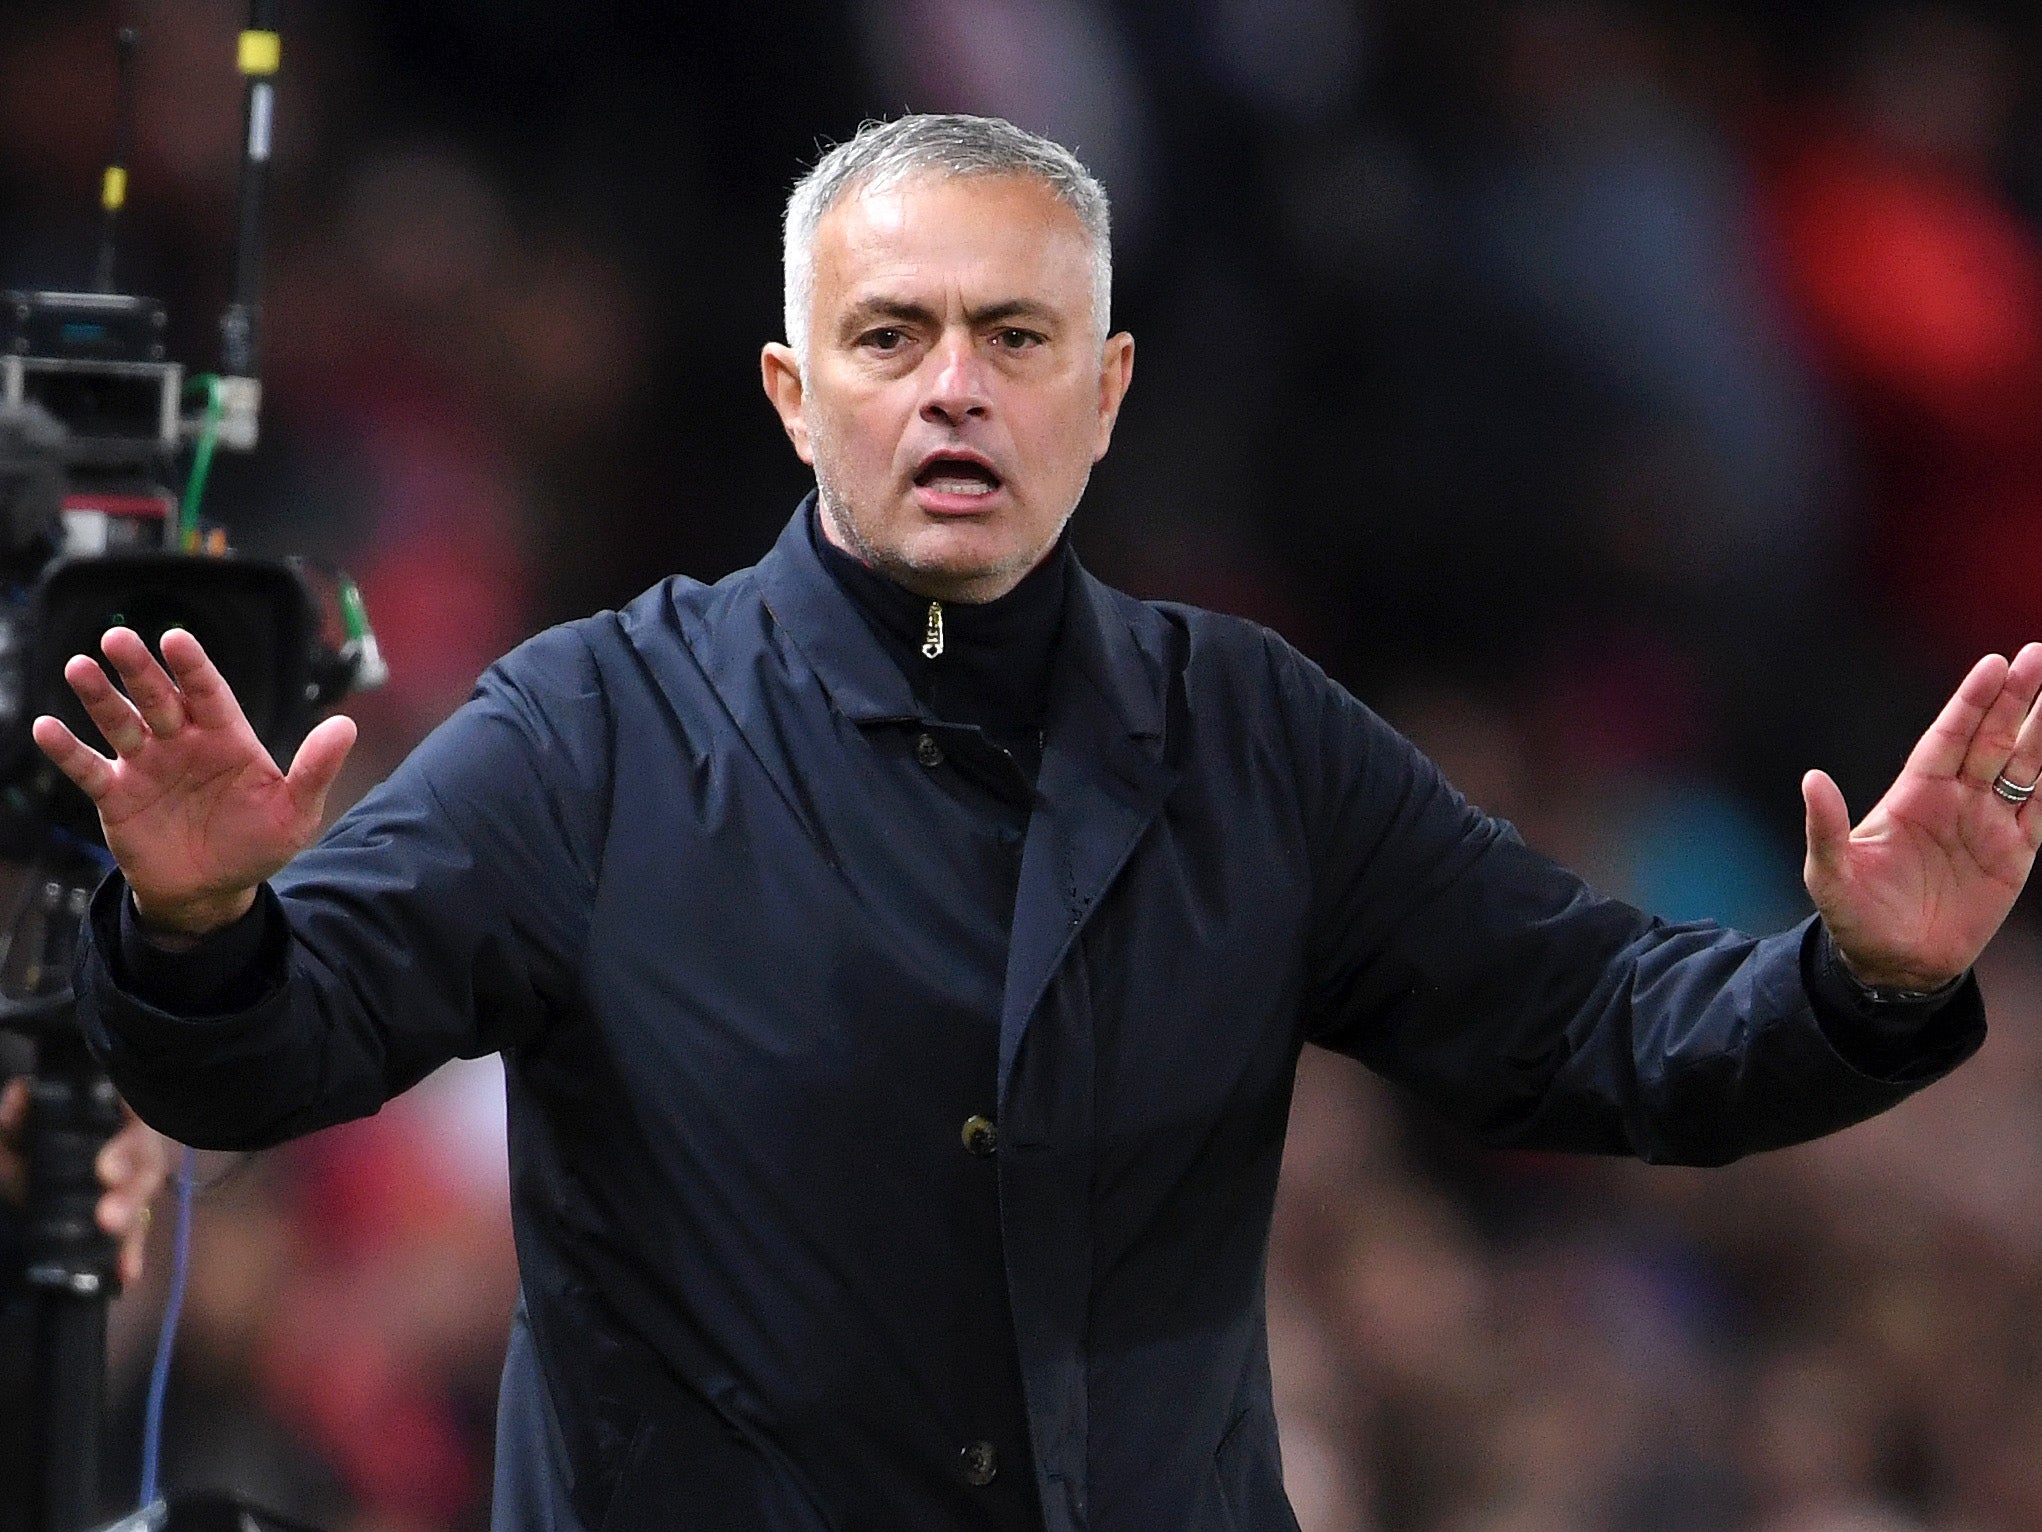 Jose Mourinho was alleged to have sworn in Portuguese into a camera